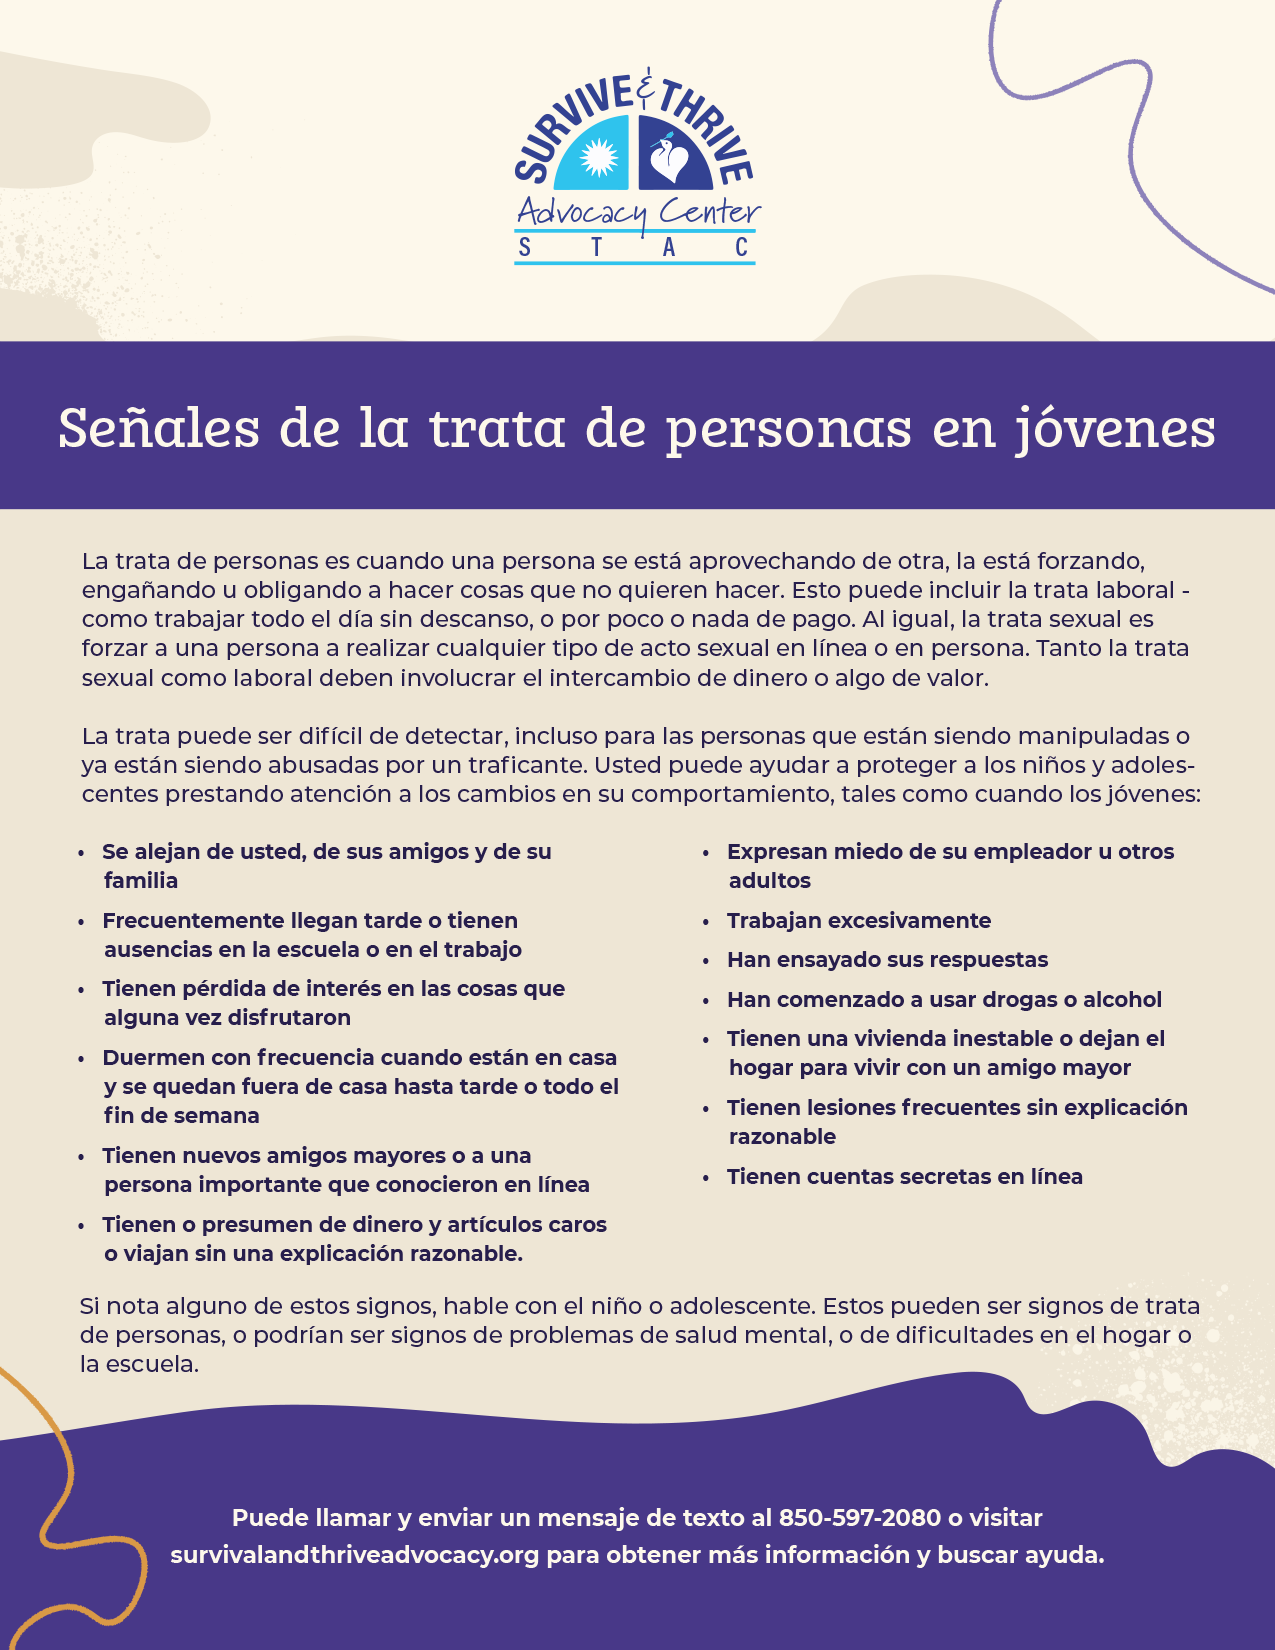 Signs of Human Trafficking in Youth Spanish